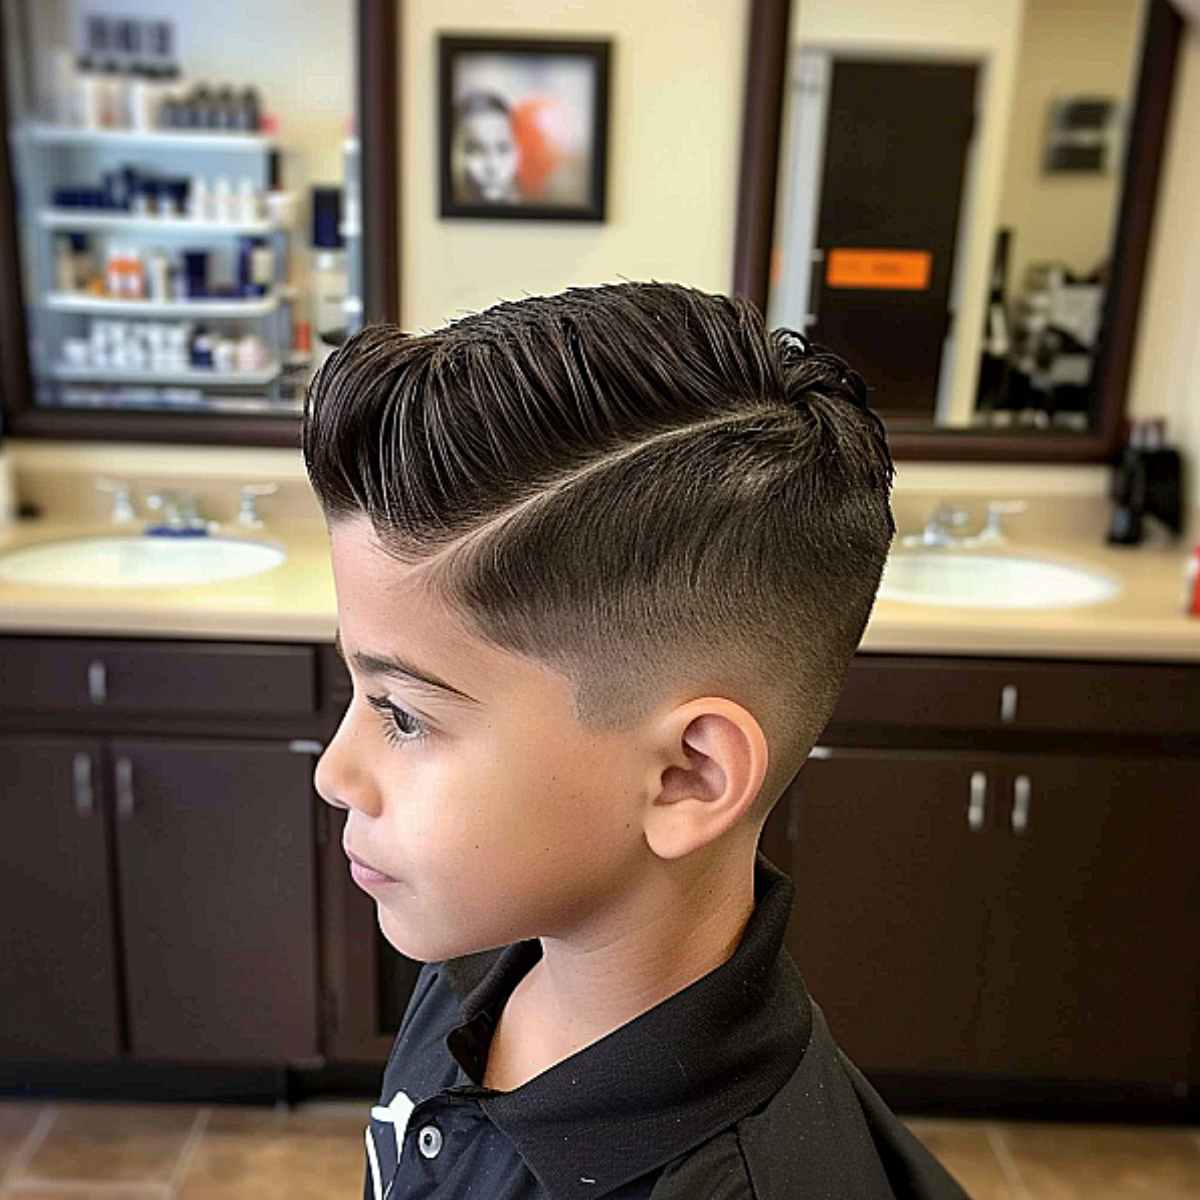 A low fade haircut that's tapered for